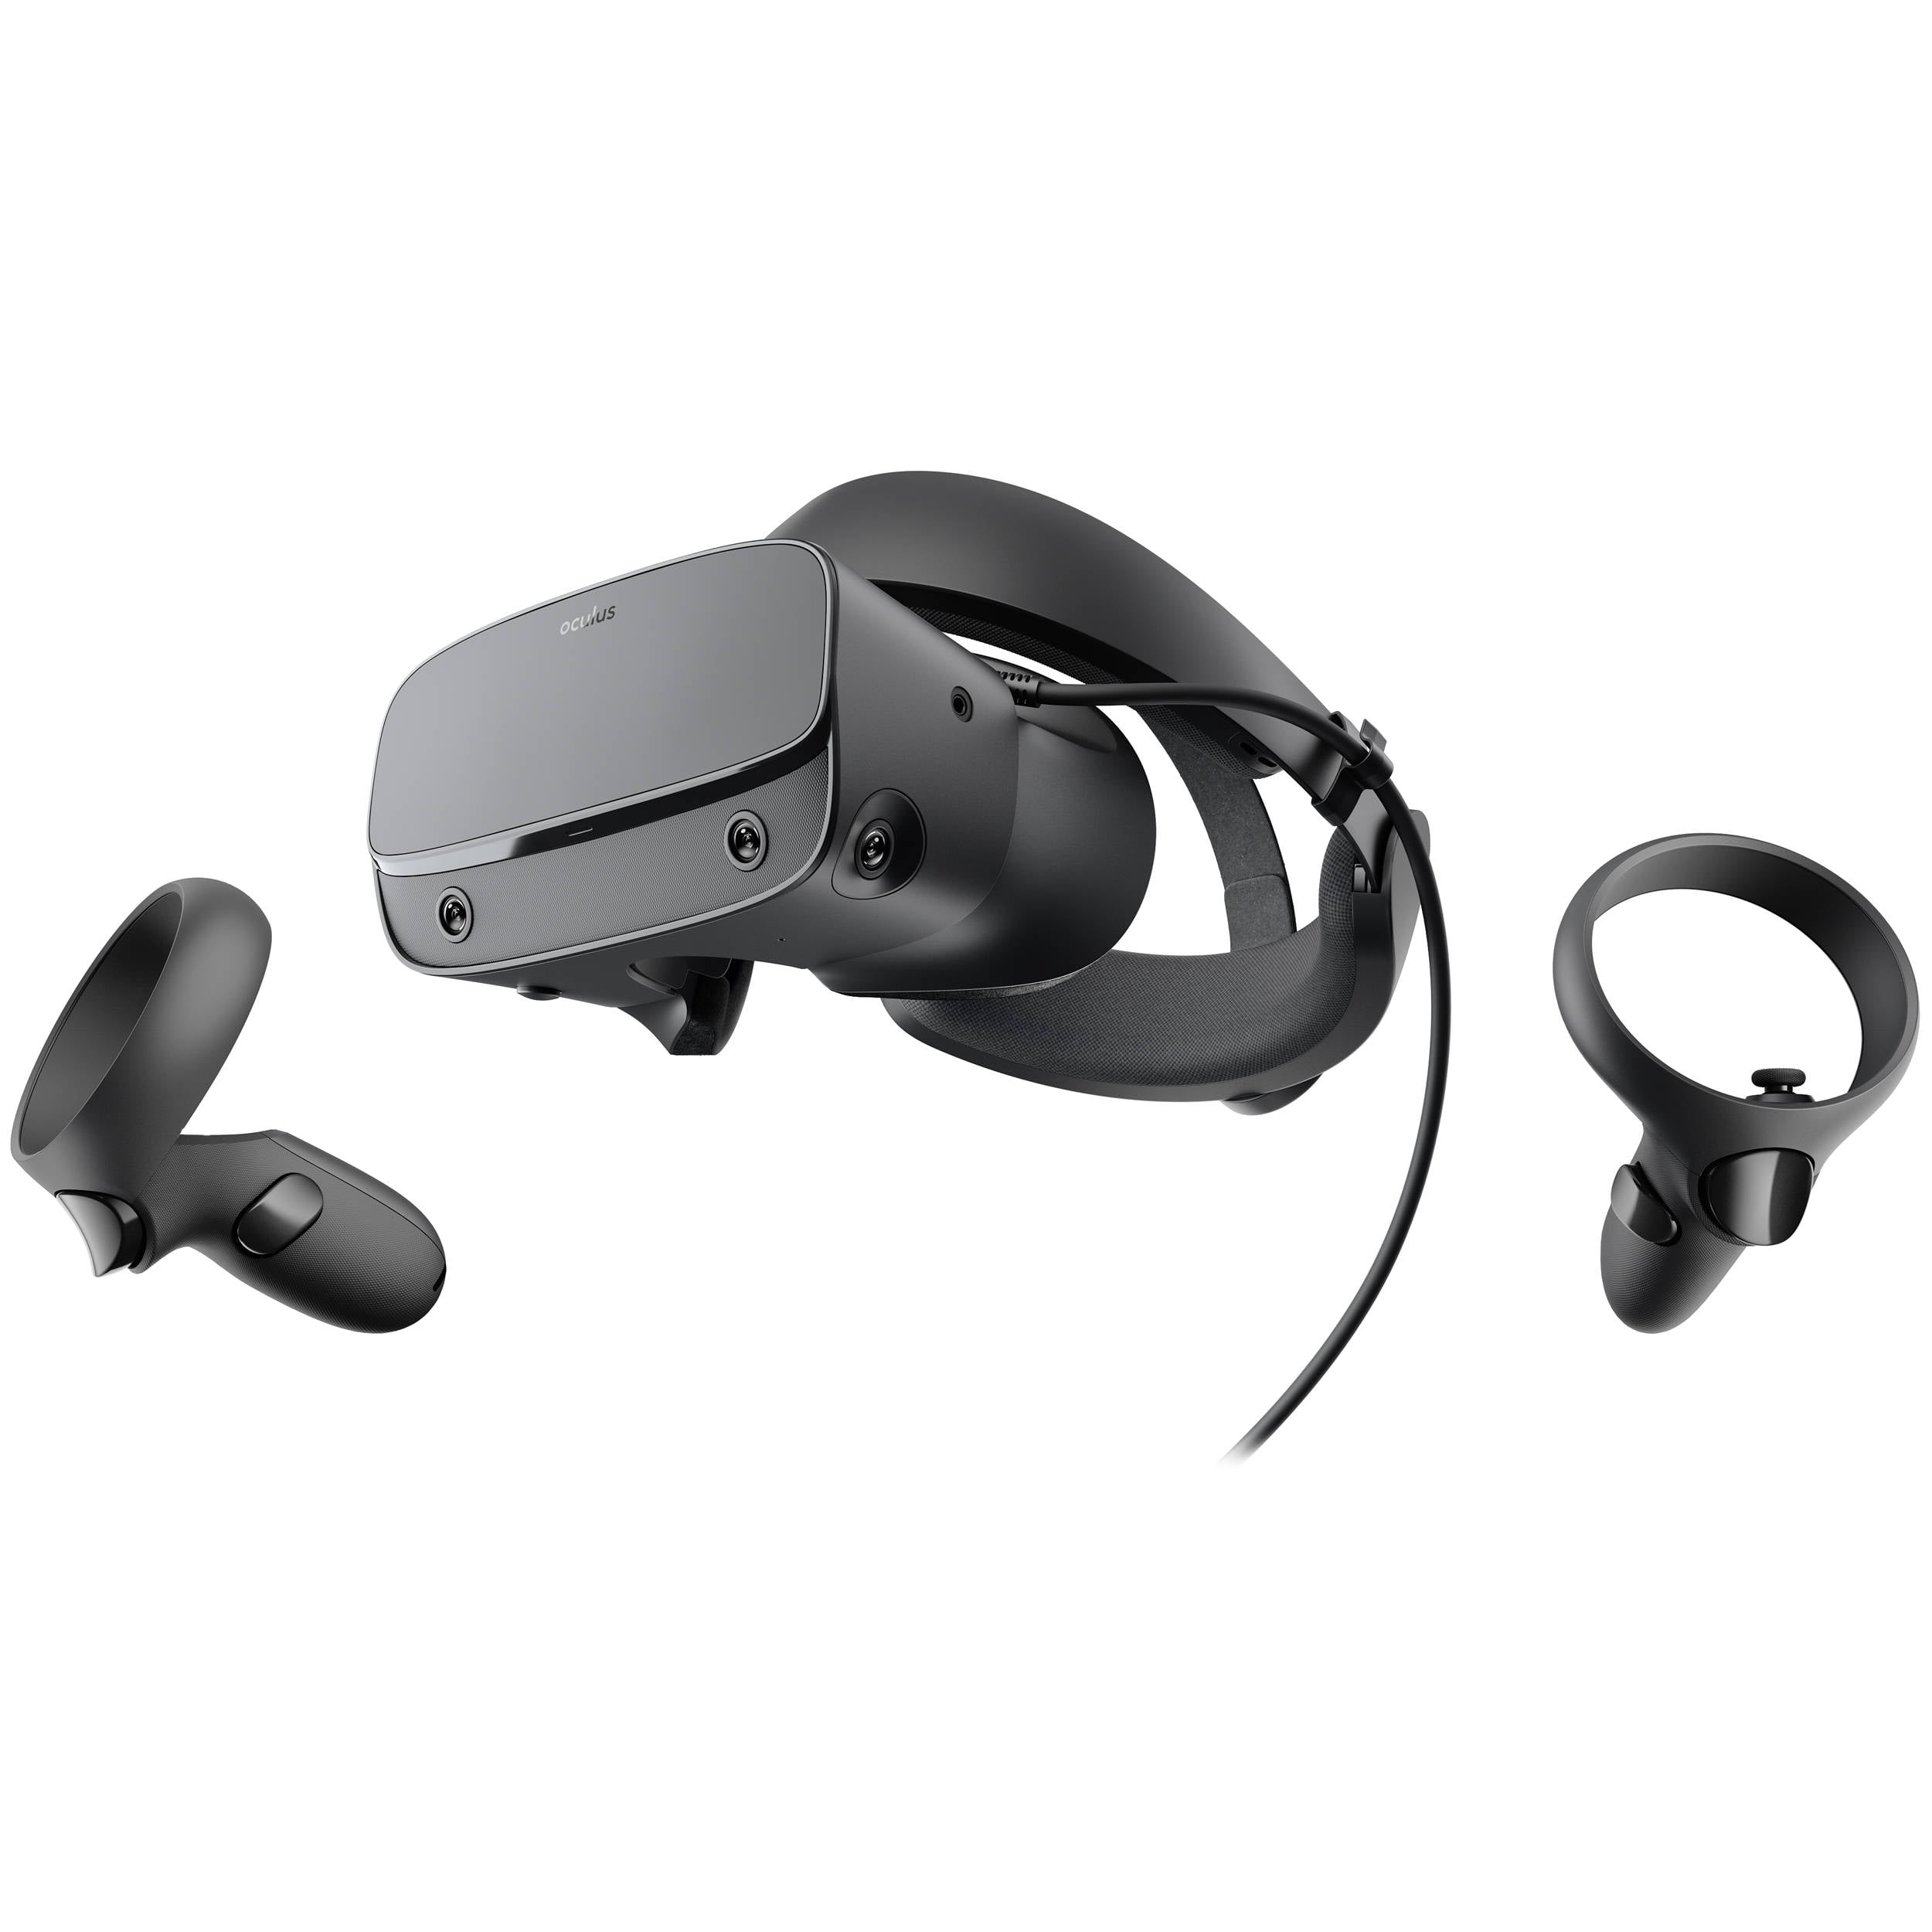 Oculus Rift S PC Powered VR Gaming Headset Black Touch Controller, 3D  Positional Audio, Built-in Room-Scale Insight Tracking, Fit Wheel  Adjustable 